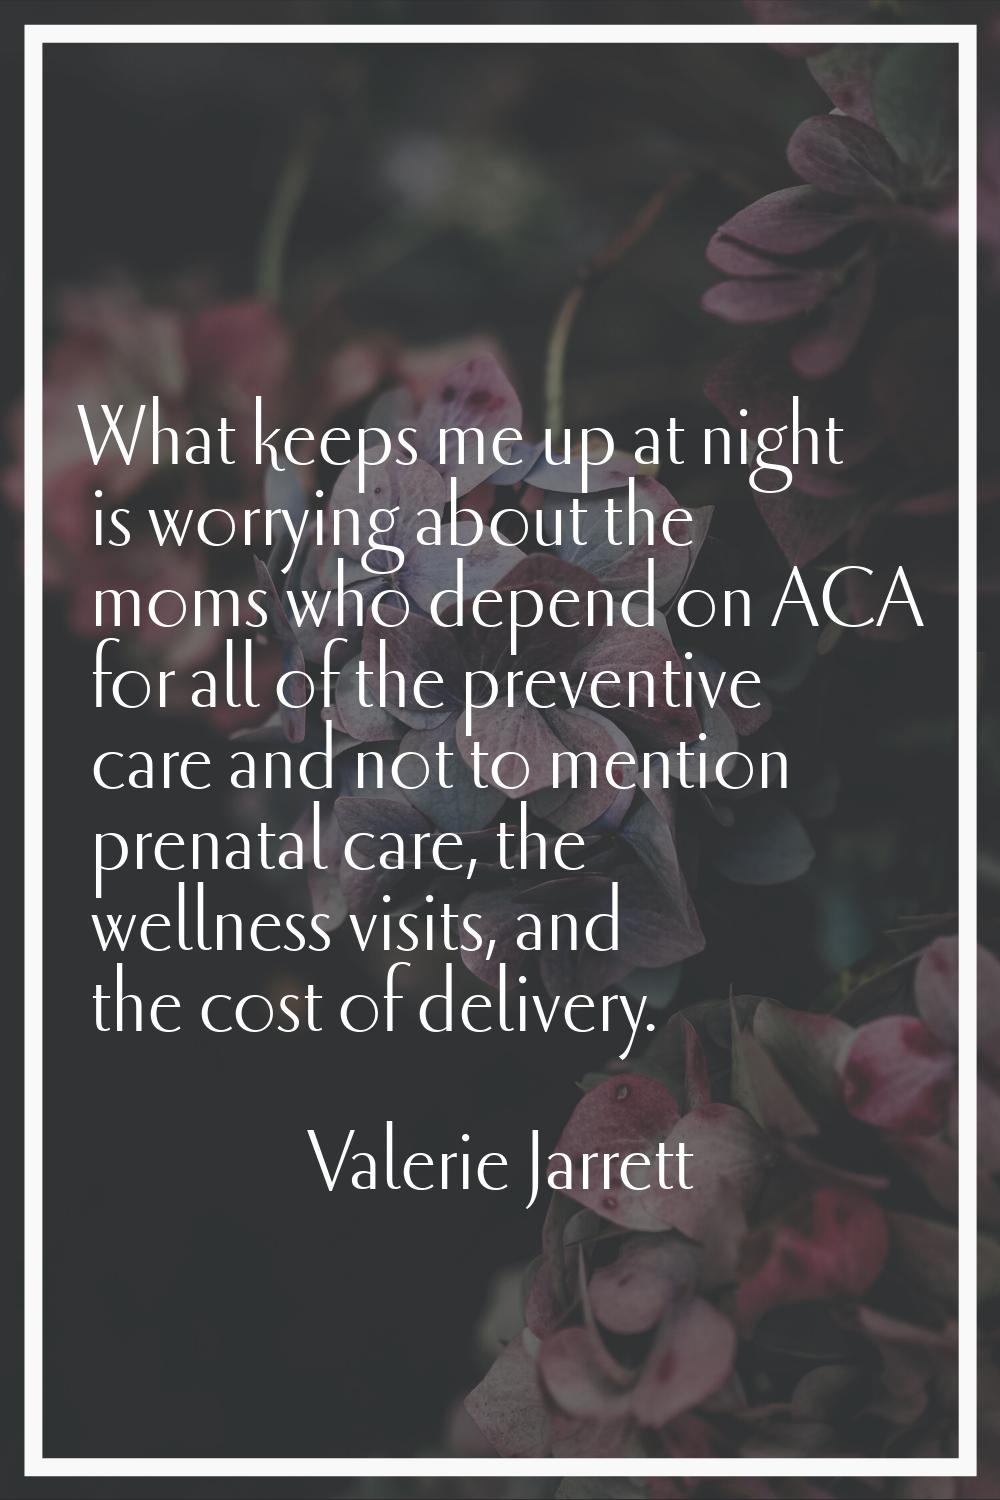 What keeps me up at night is worrying about the moms who depend on ACA for all of the preventive ca